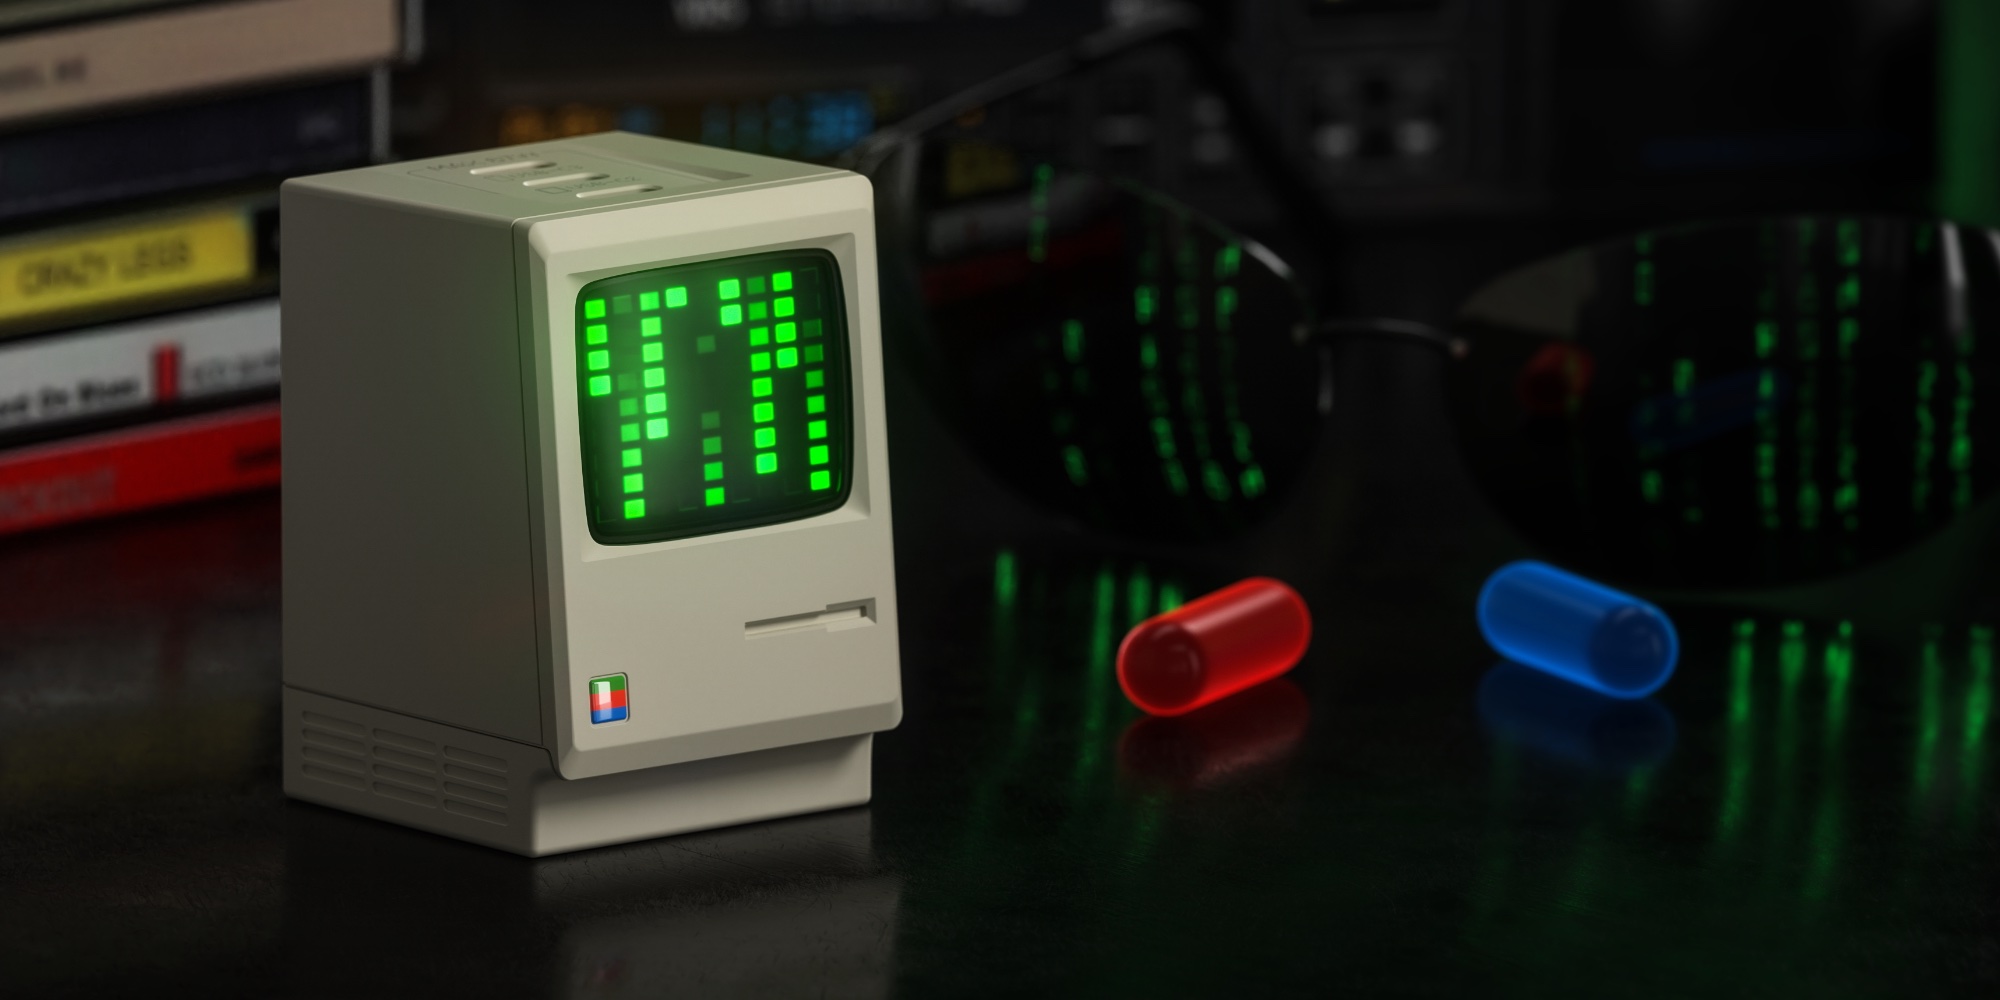 Shargeek Retro 67 charger launches with classic Macintosh design